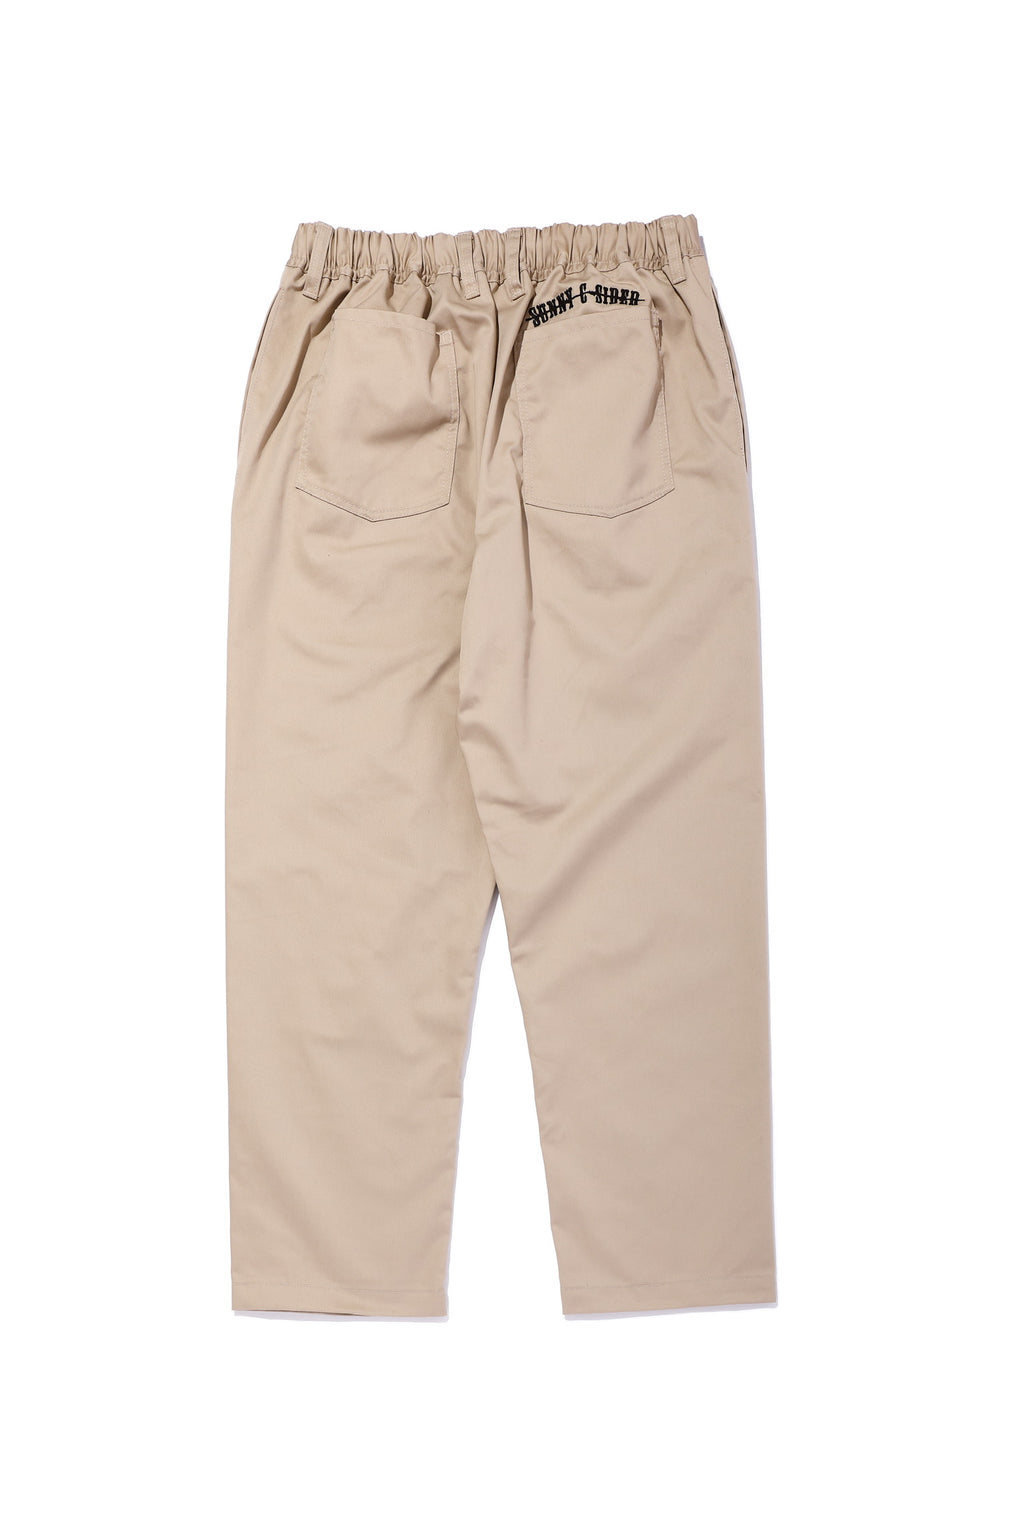 21SCS-WS-b.wire Pants / BEG